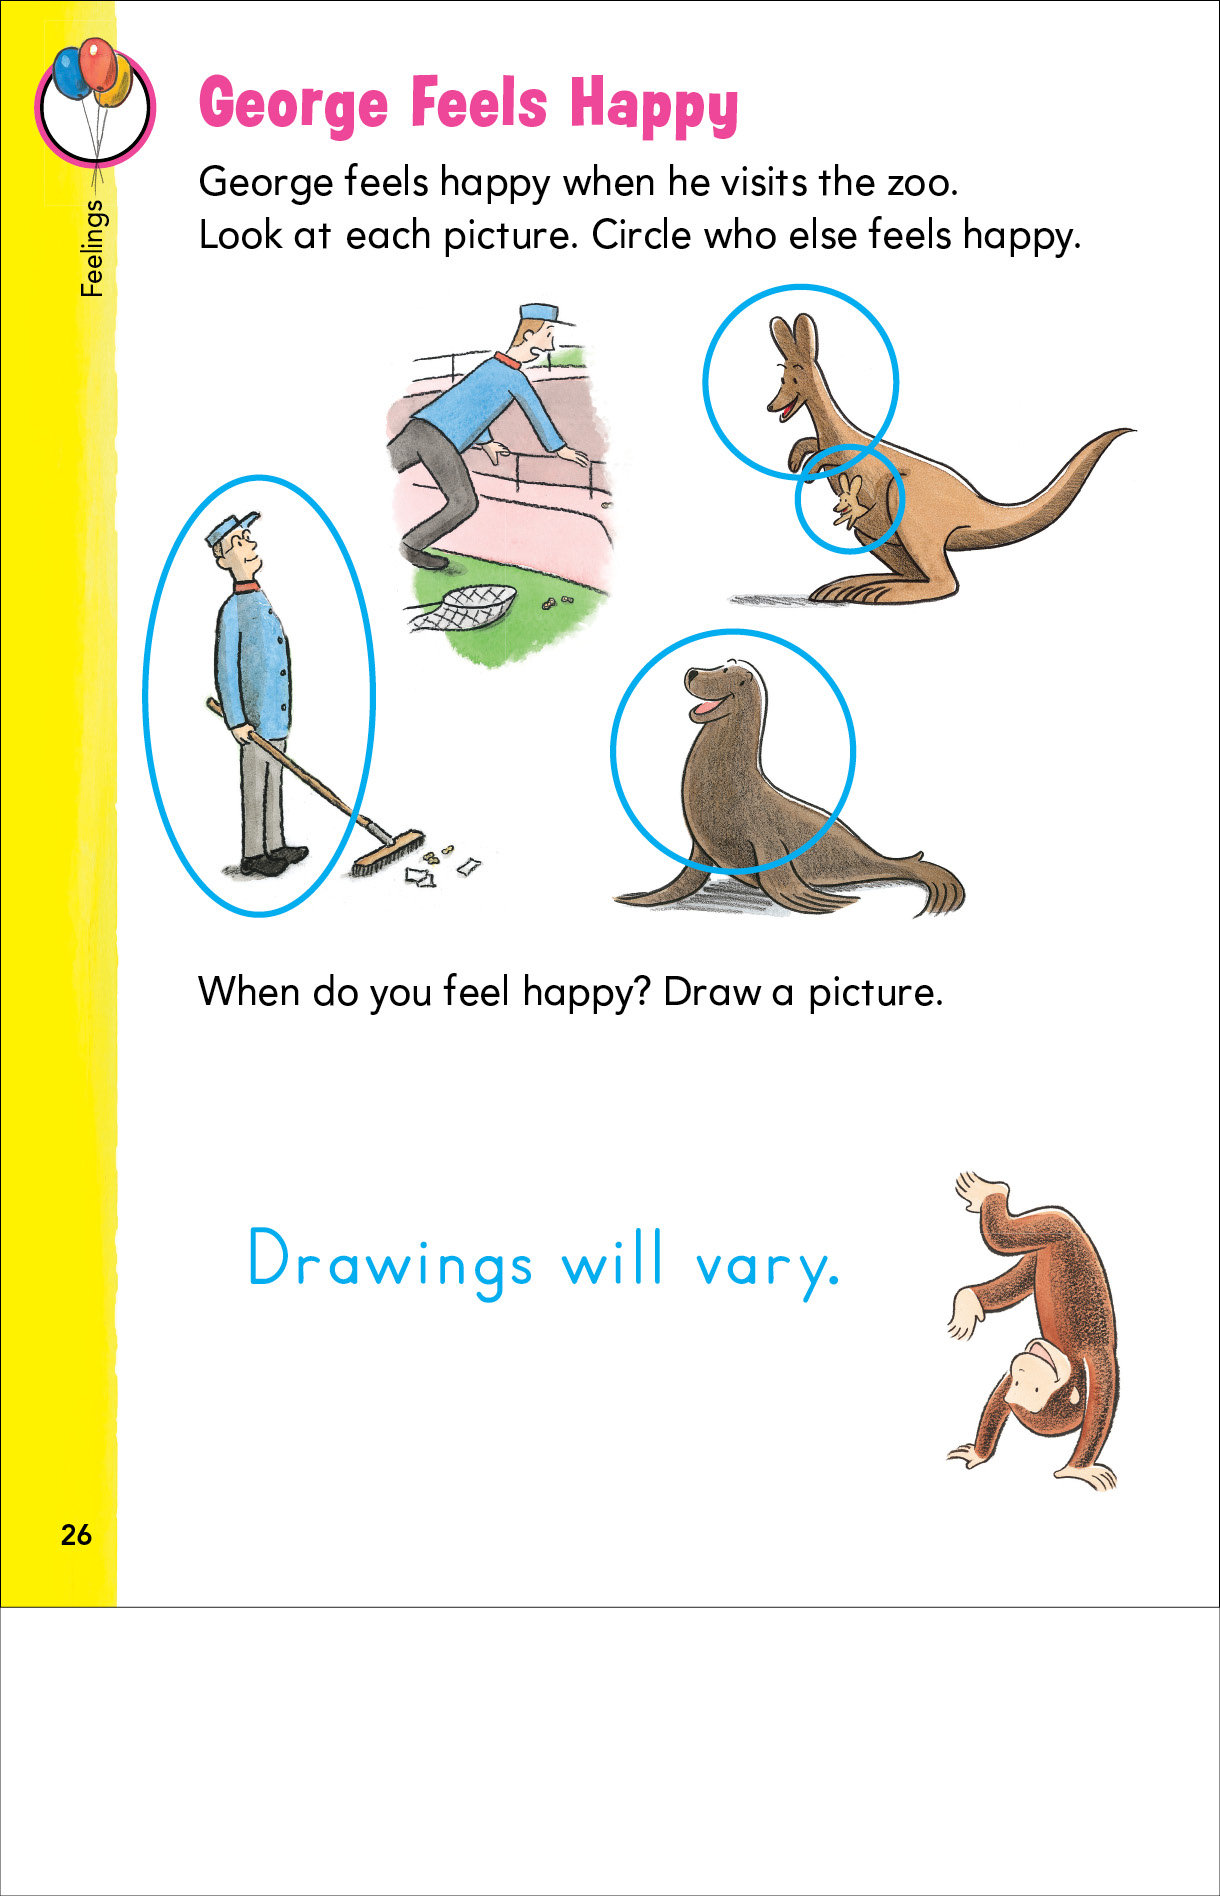 Page from Curious George Adventures in Learning. It reviews feeling happy.